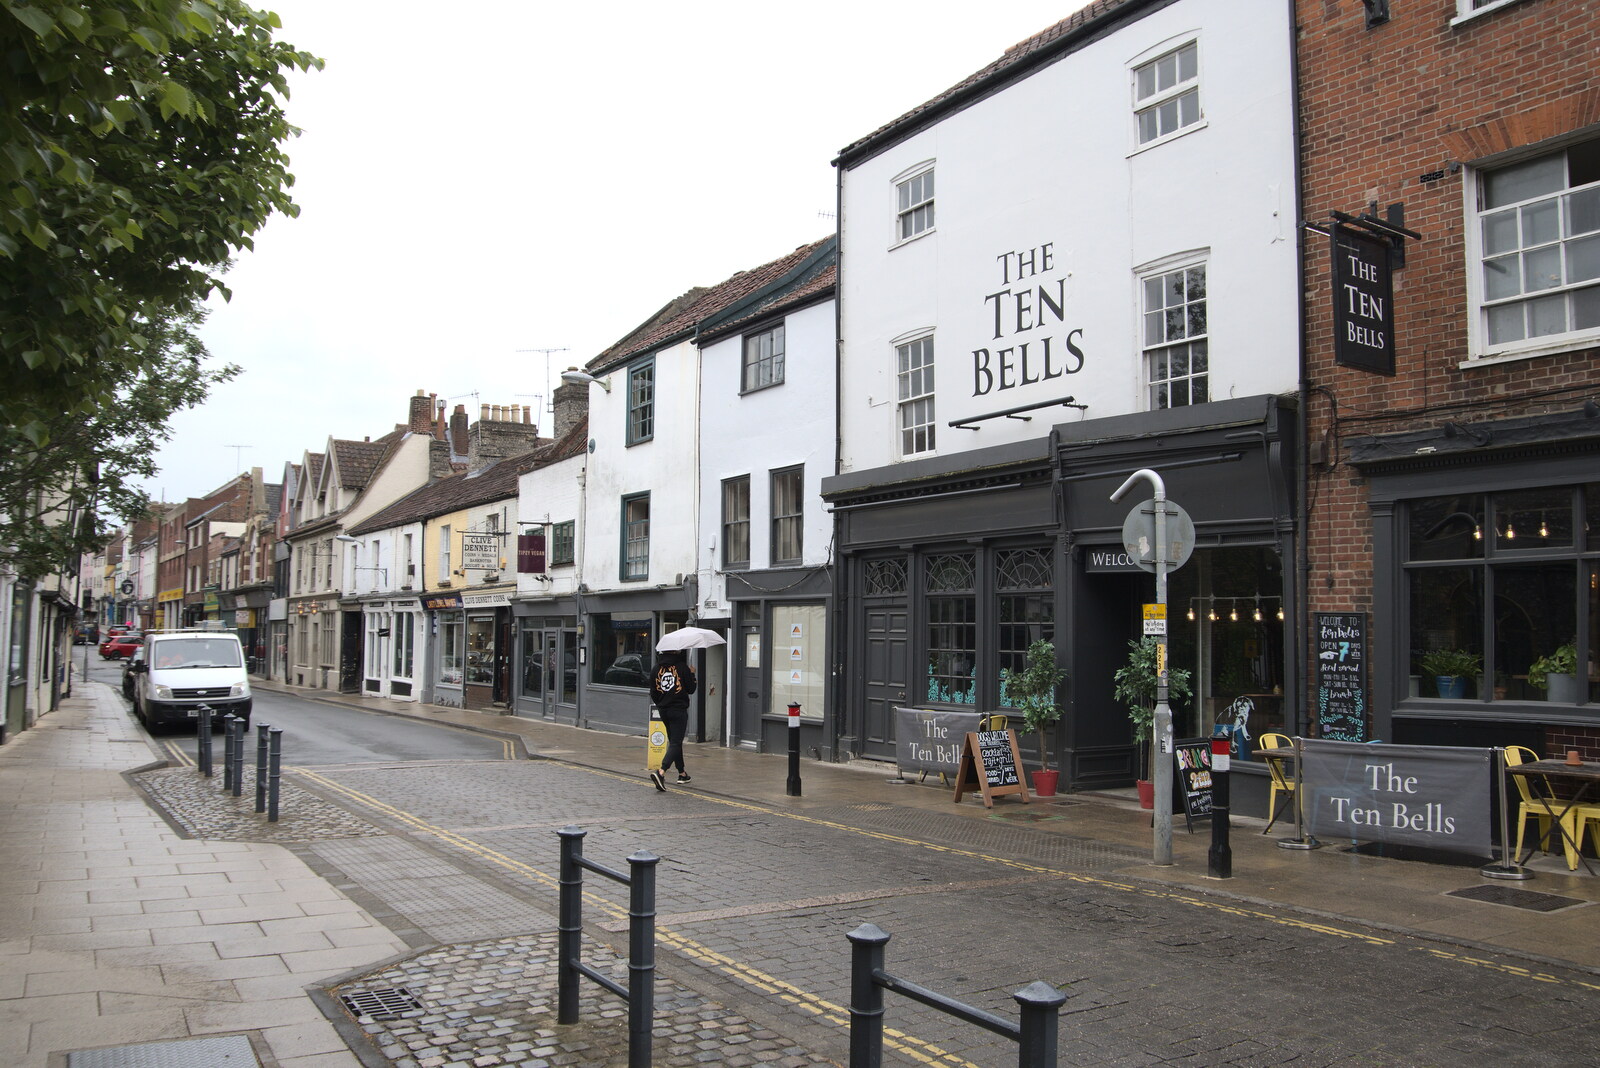 The Ten Bells on St. Benedict Street from Discovering the Hidden City: Norwich, Norfolk - 23rd May 2022